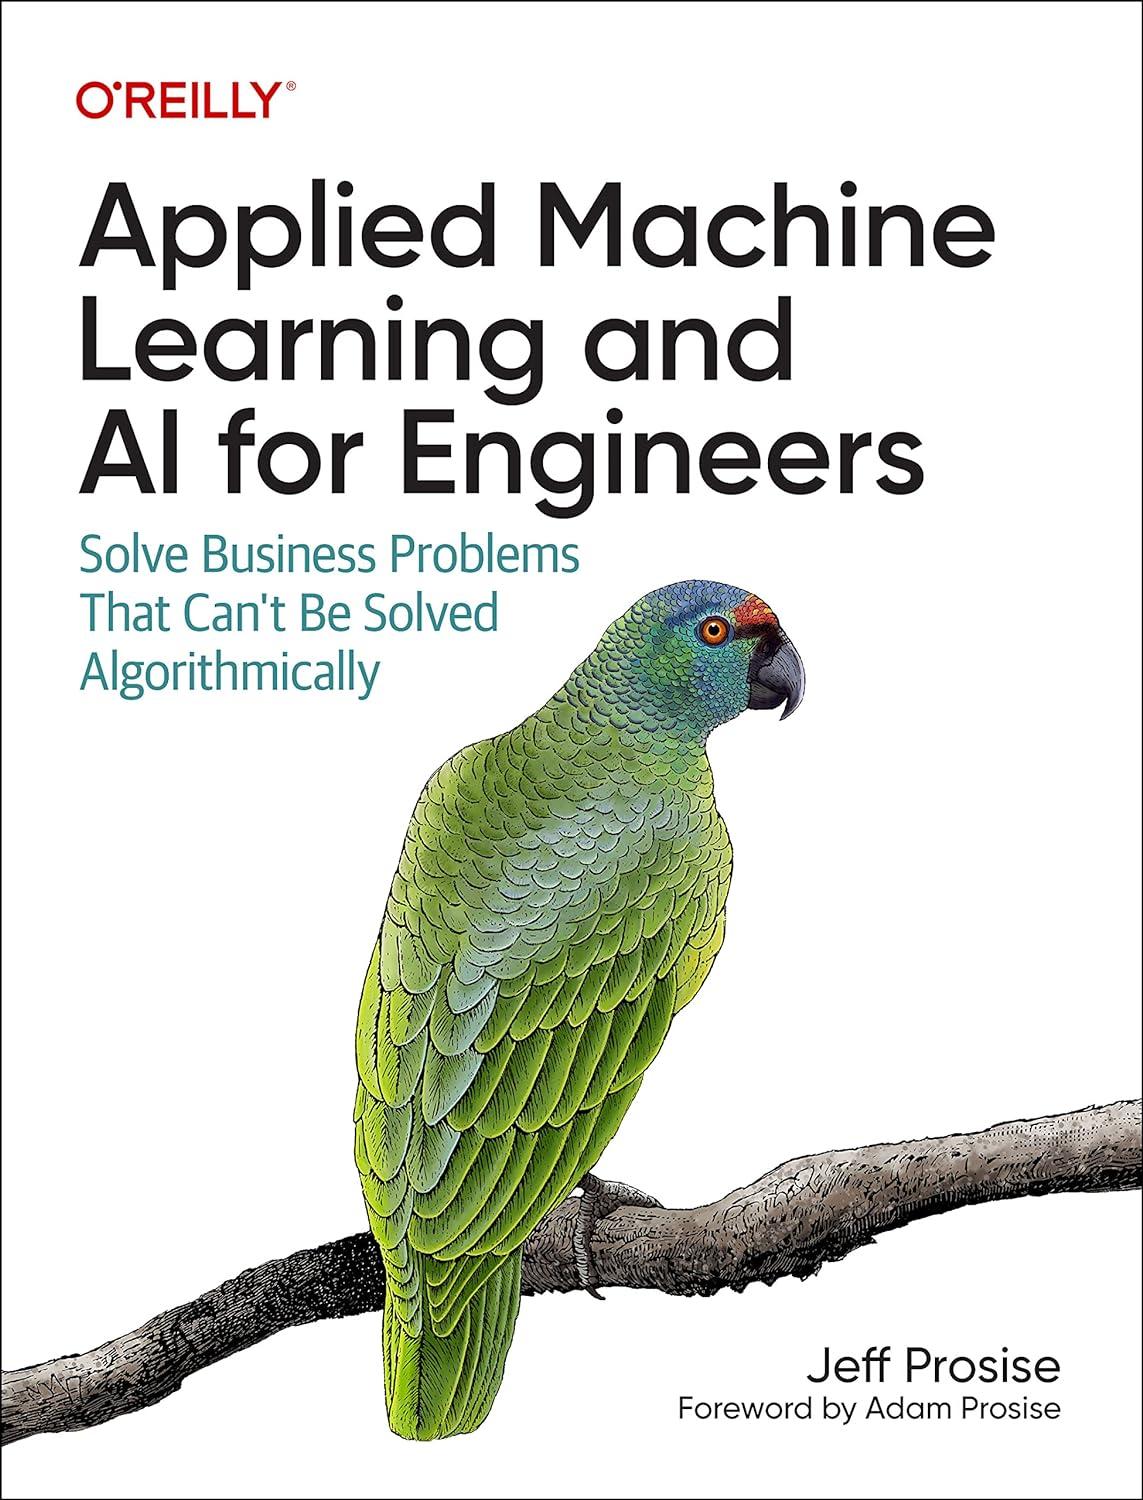 applied machine learning and ai for engineers solve business problems that can't be solved algorithmically